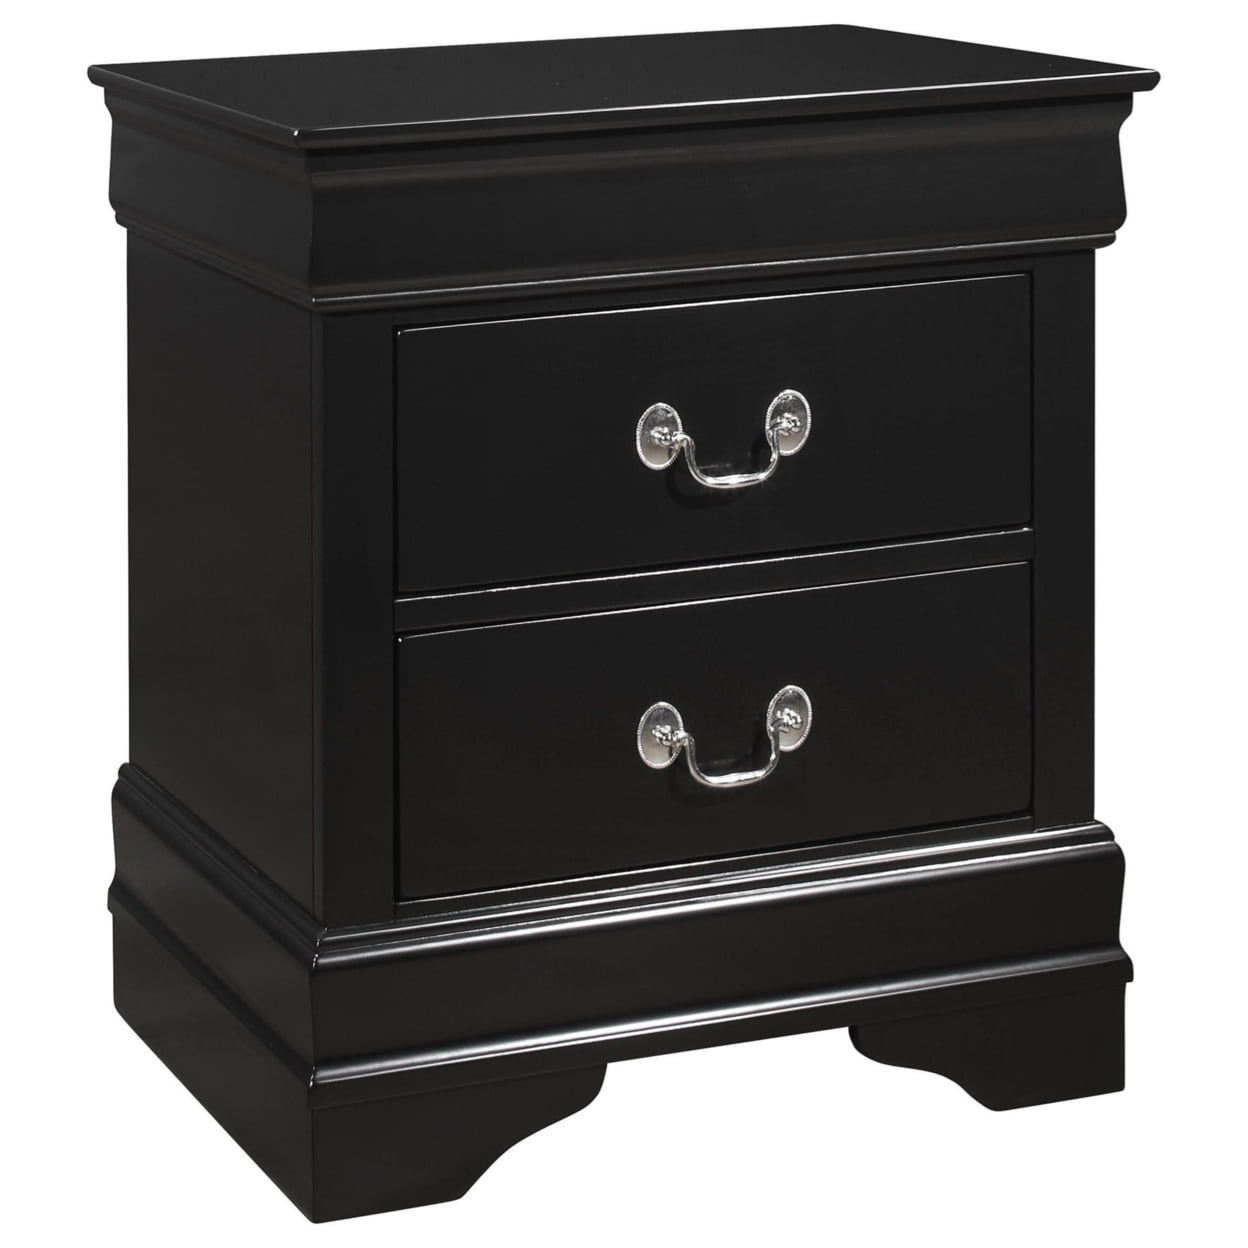 Picture of Benjara BM215224 2 Drawers Wooden Frame Nightstand with Antique Metal Pulls - Black - 23.6 x 15.5 x 21 in.